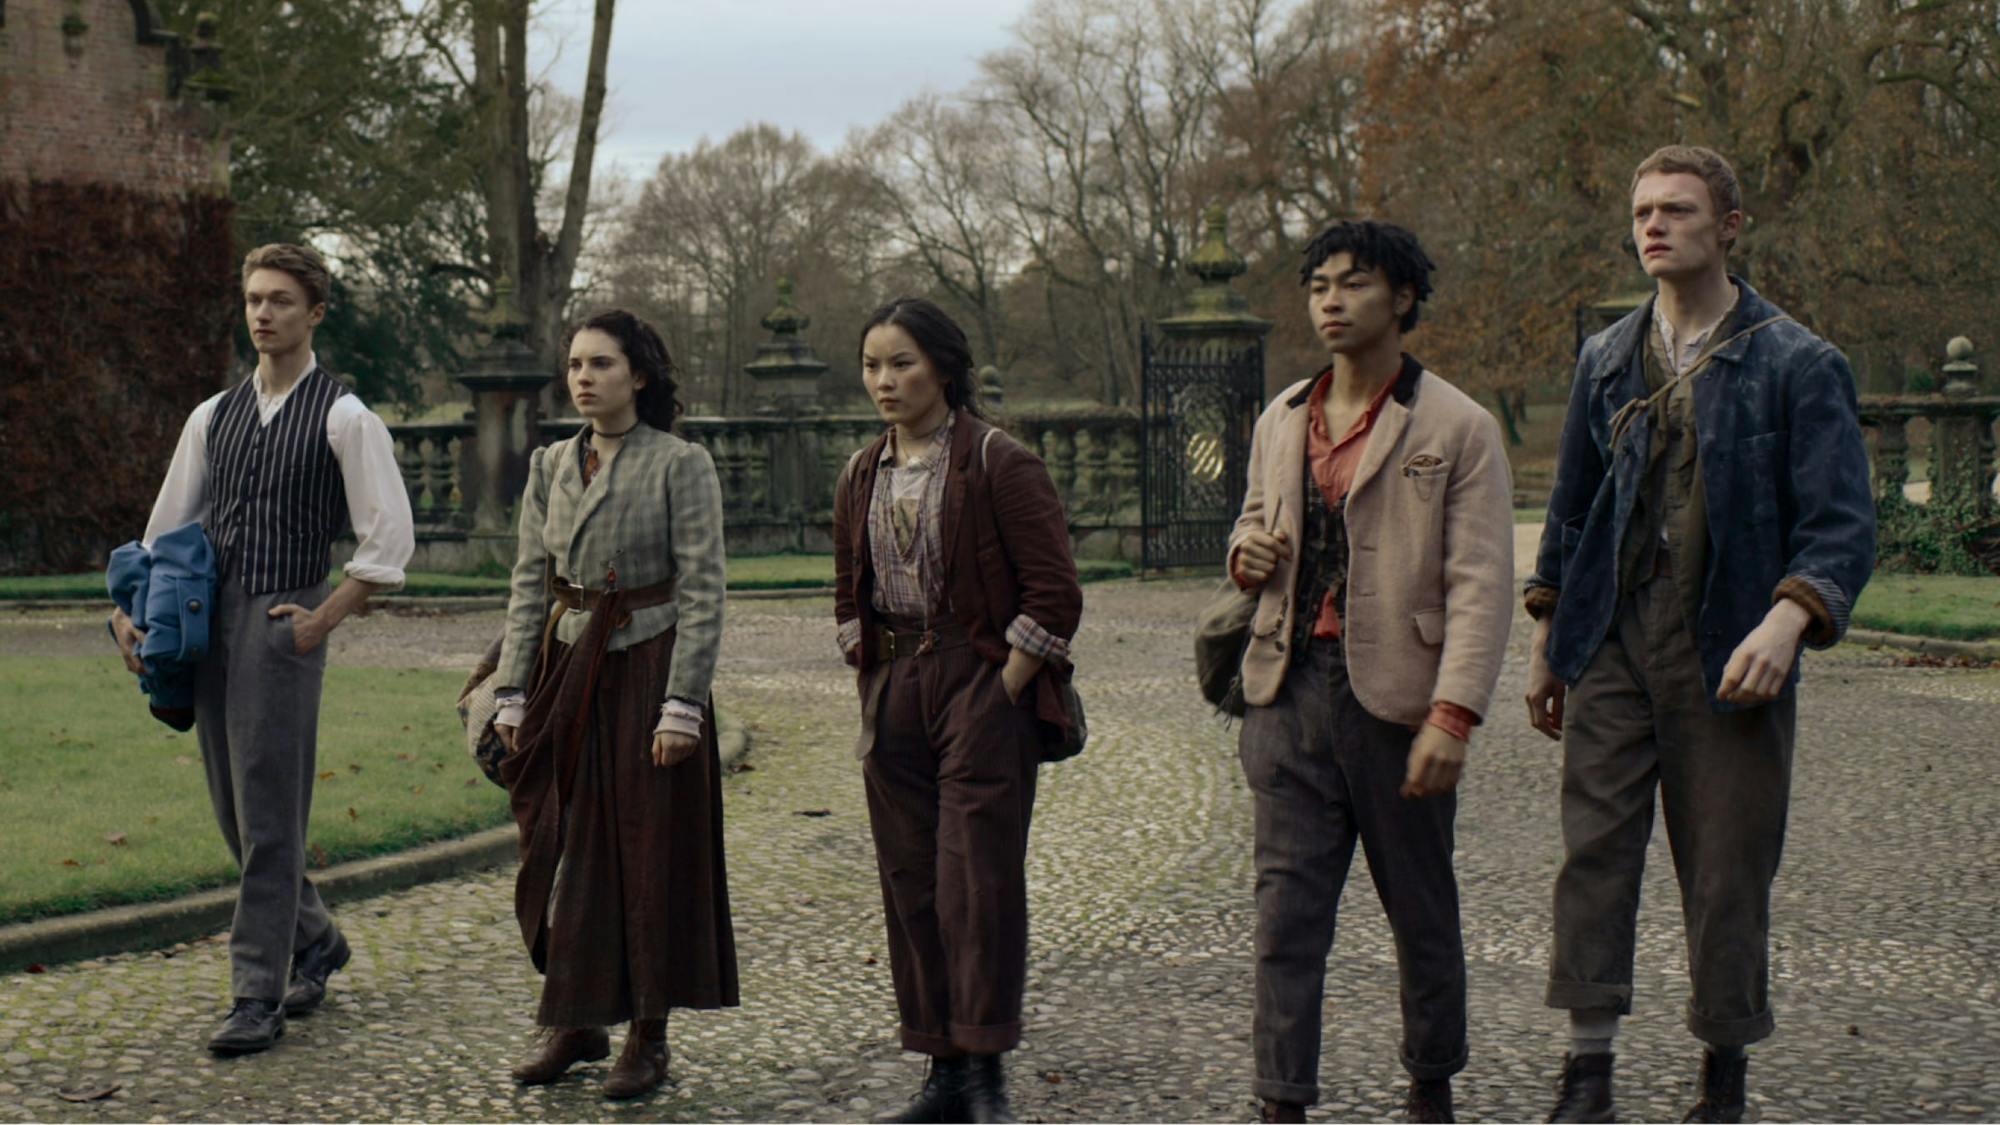 The cast walks in a line through a cobblestone courtyard in this shot from the series. Behind them, the courtyard opens into grounds, with a line of trees visible, their leaves in reds and oranges. The characters are decked out in steampunk chic: baggy trousers, plaids, stripes, vests, and blazers — all the worse for wear.